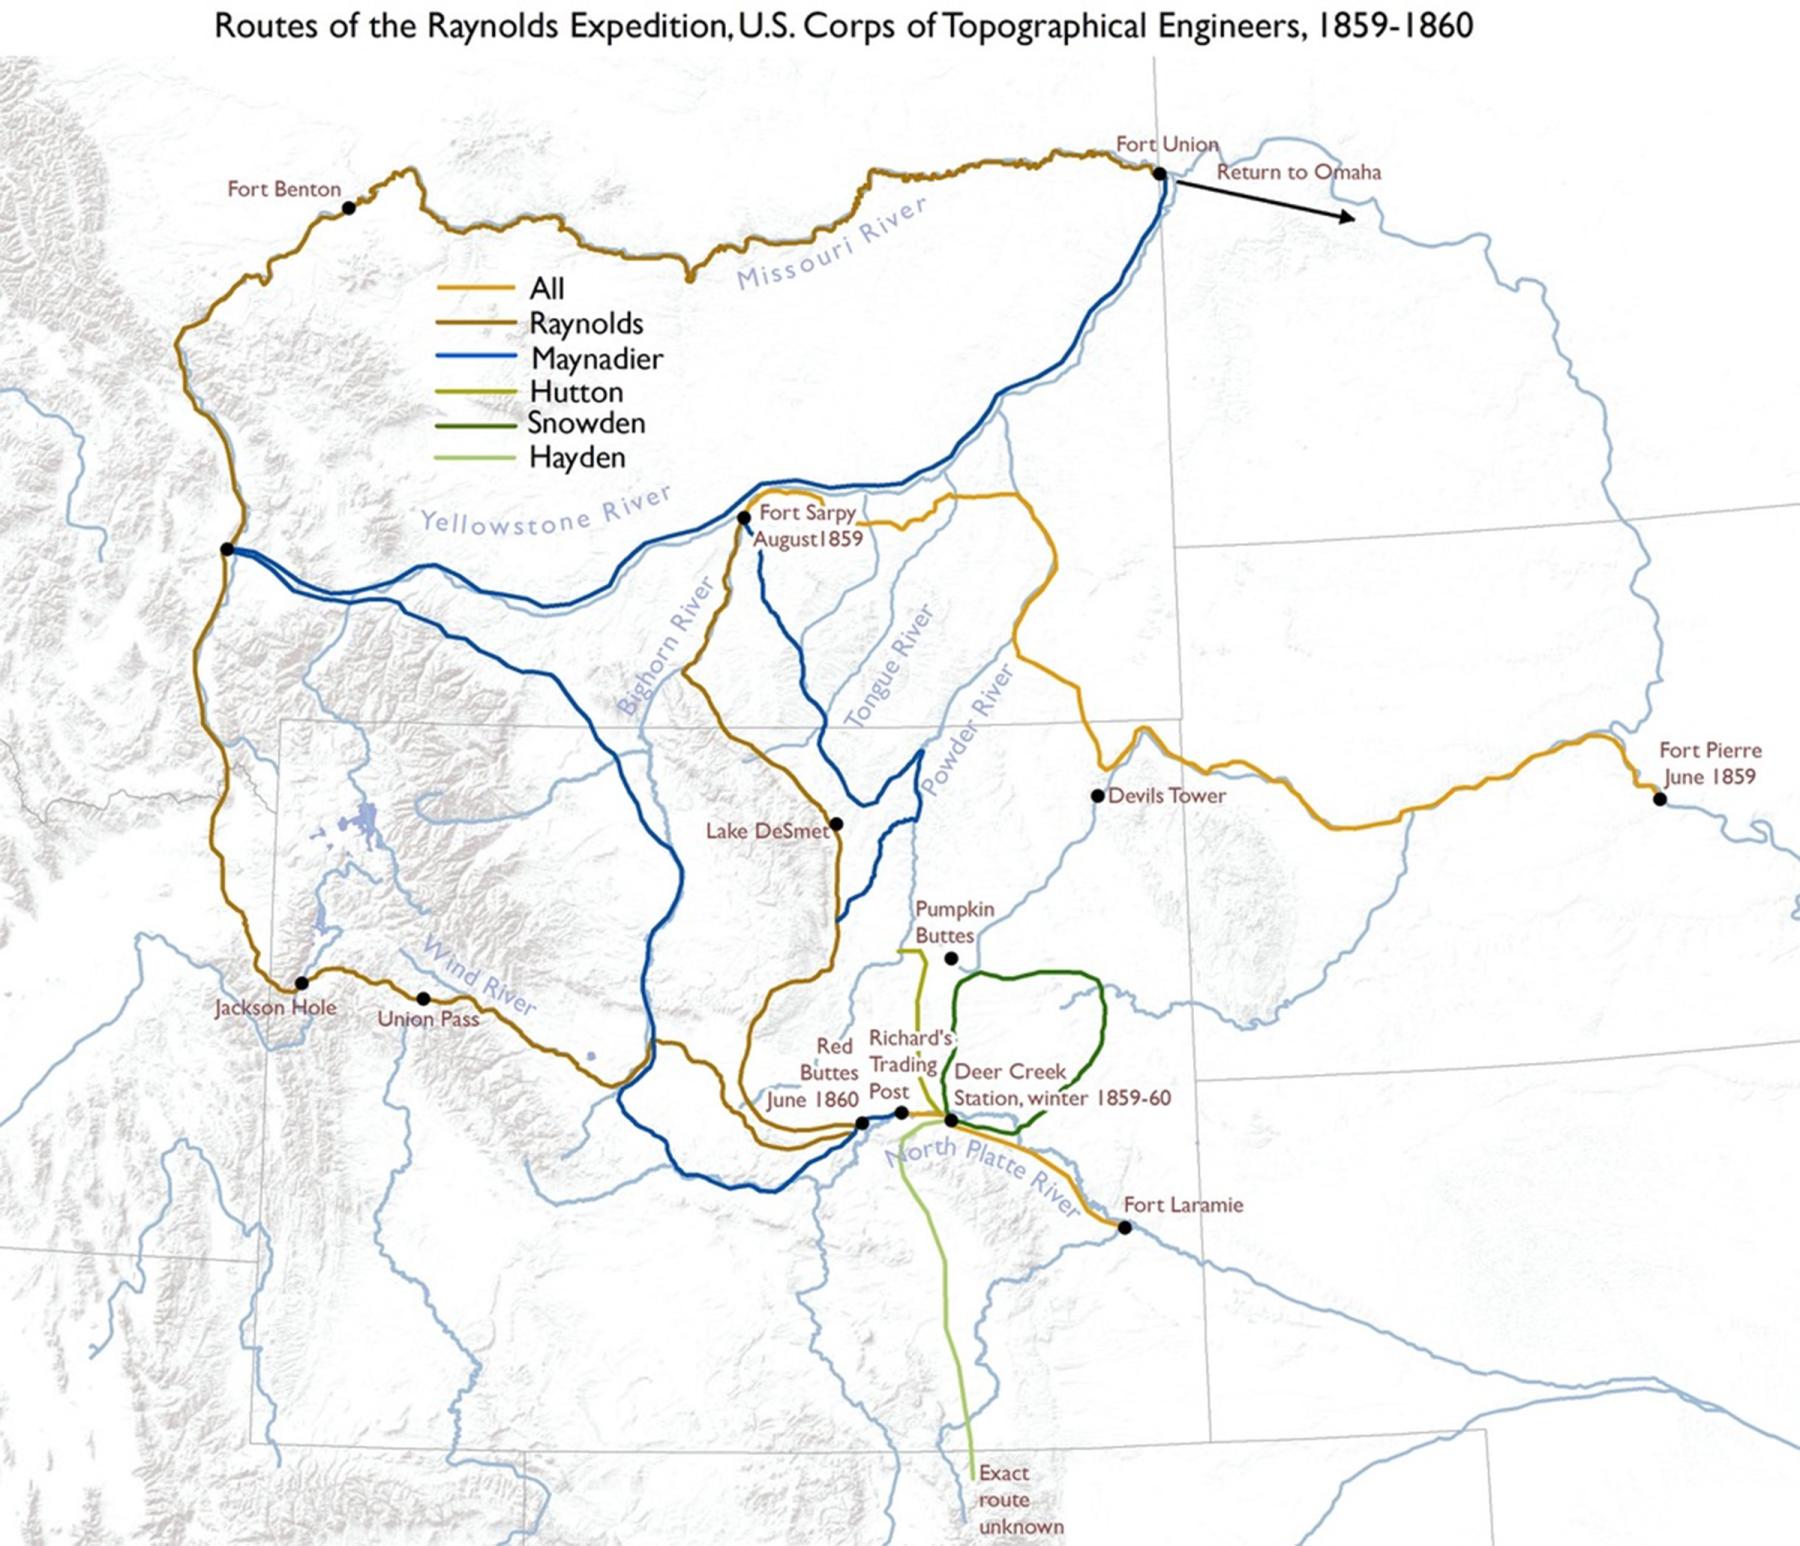 Members of the Raynolds Expedition in 1859 and 1860 came up the Missouri as far as Fort Pierre, traveled overland to Fort Sarpy, a trading post on the Yellowstone, and from there moved south along the east flank of the Bighorn Mountains. They wintered near the confluence of Deer Creek and the North Platte River near present Glenrock, Wyoming. From there they again divided forces, with Capt. Raynolds heading west over Union Pass through Jackson Hole, turning north into what are now Idaho and Montana and cont